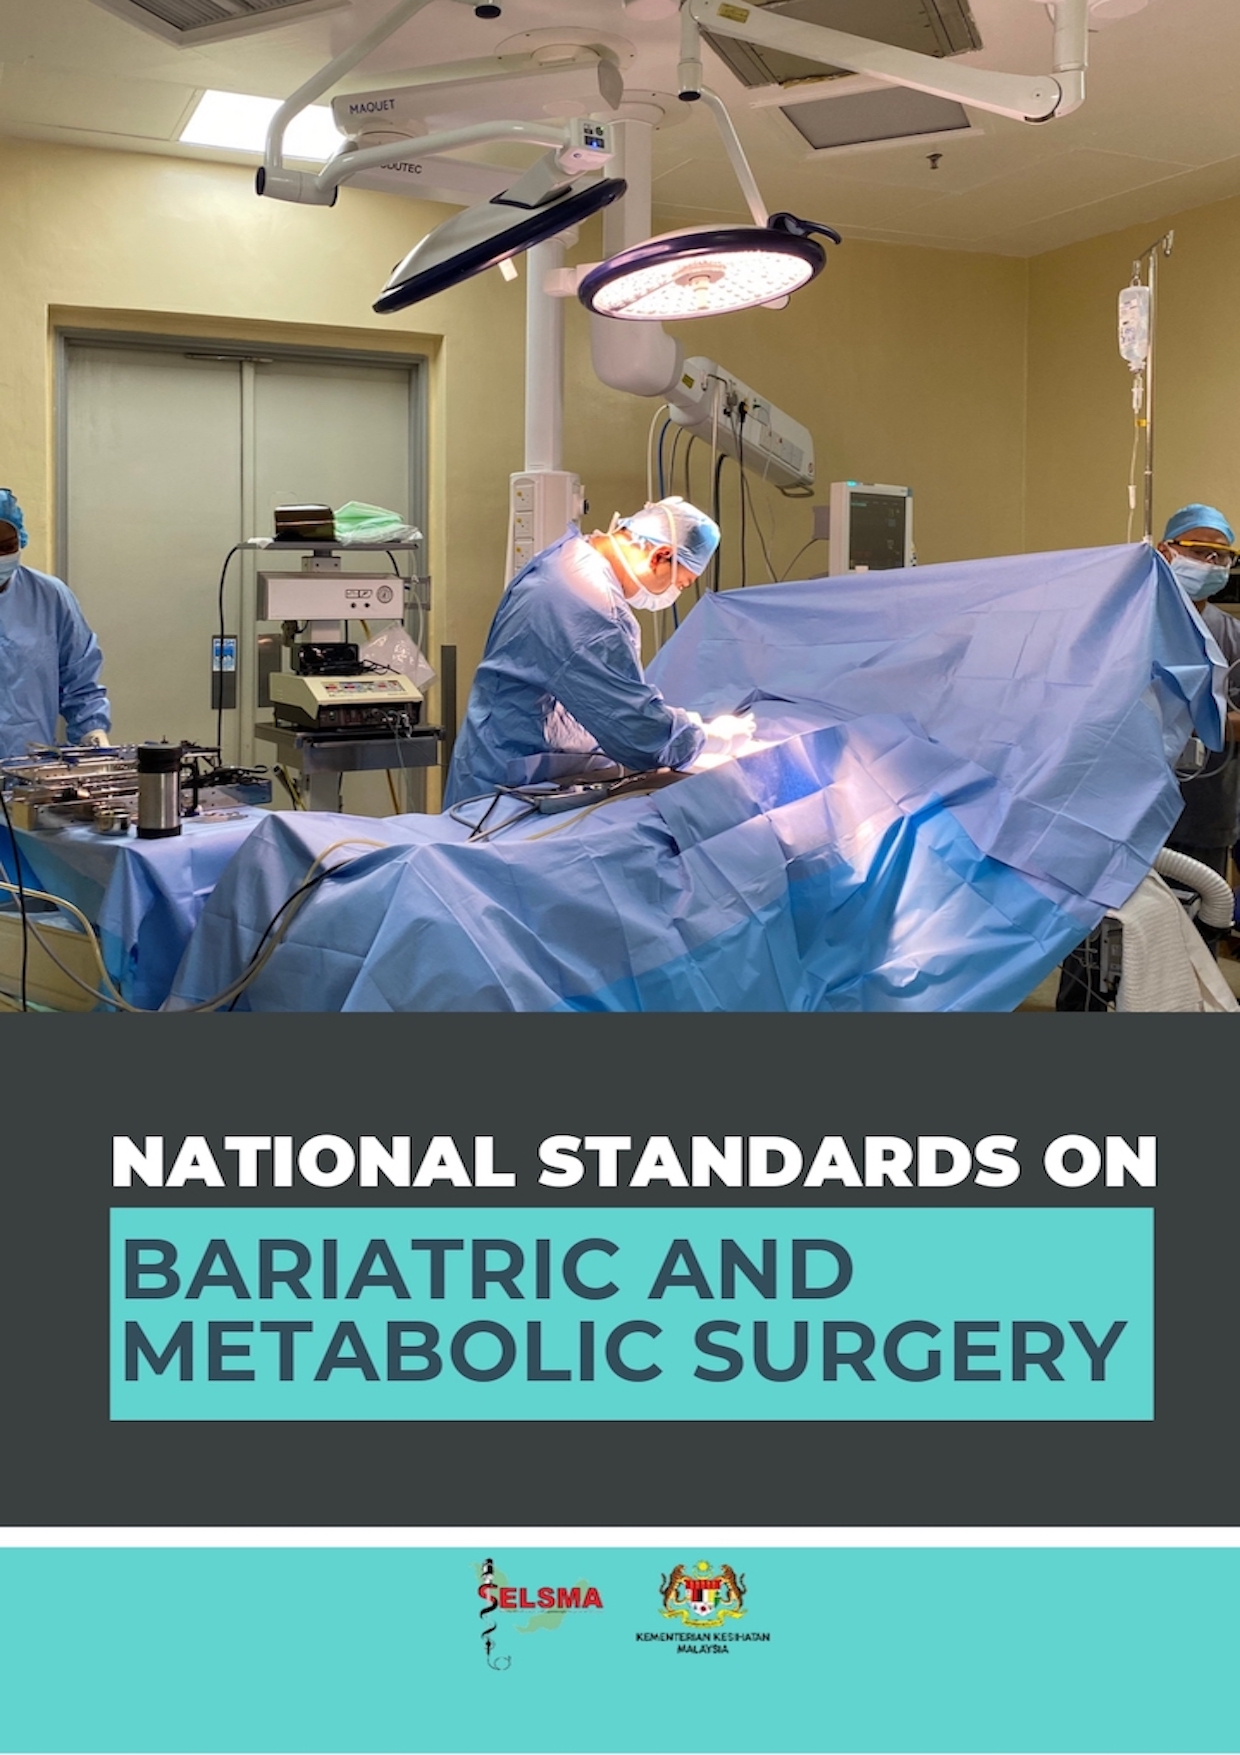 SELSMA National Standards on Bariatric and Metabolic Surgery